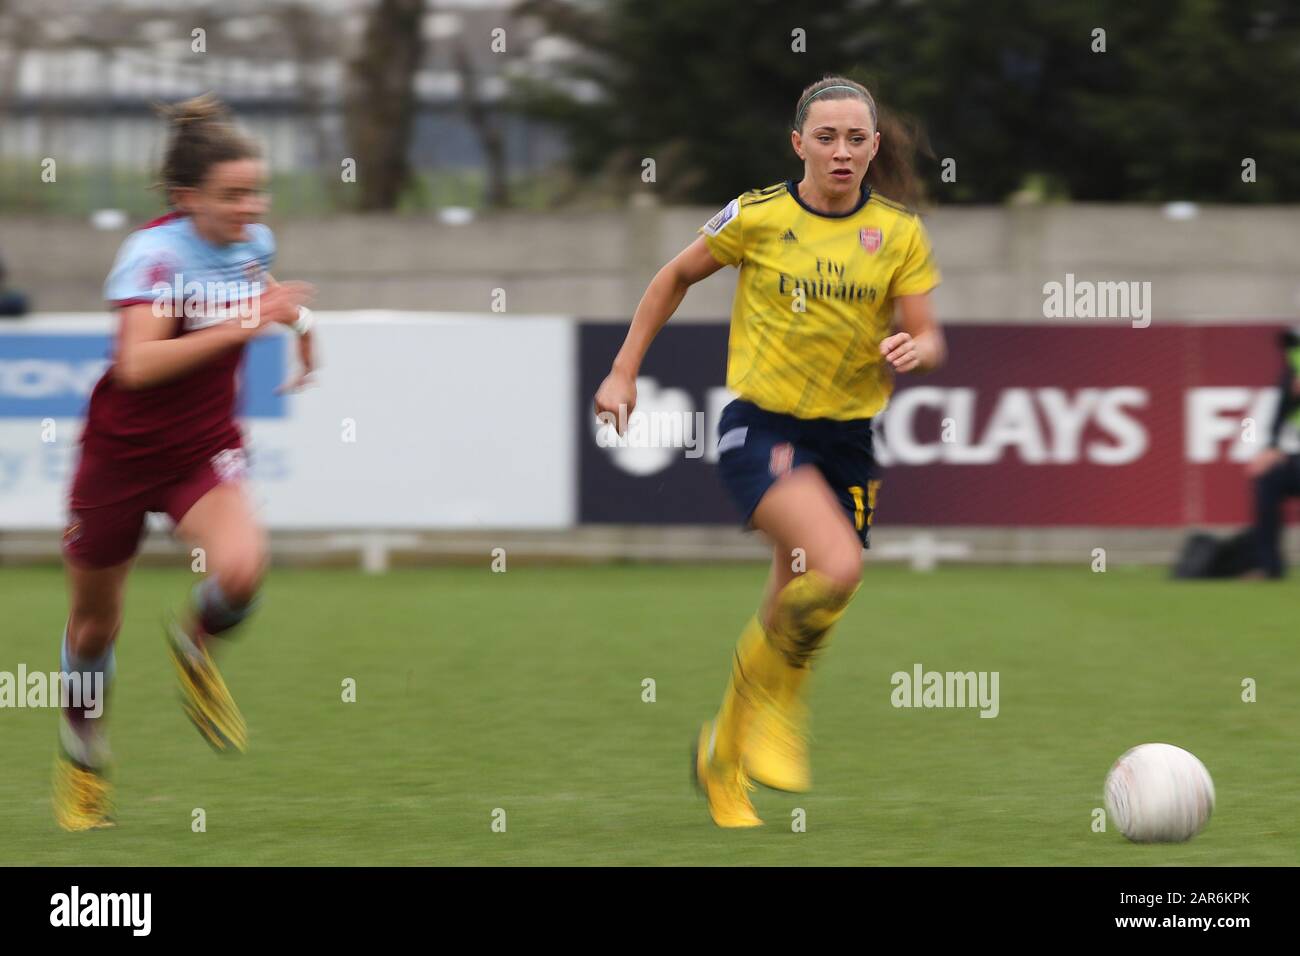 Romford, UK. 26th Jan, 2020.  Katie Mccabe of Arsenal Women being chased by Leanne Kiernan of West Ham United Women during the Women's FA Cup match between West Ham United and Arsenal at the Rush Green Stadium, Romford, London on Sunday 26th January 2020. (Credit: Jacques Feeney | MI News) Photograph may only be used for newspaper and/or magazine editorial purposes, license required for commercial use Credit: MI News & Sport /Alamy Live News Stock Photo